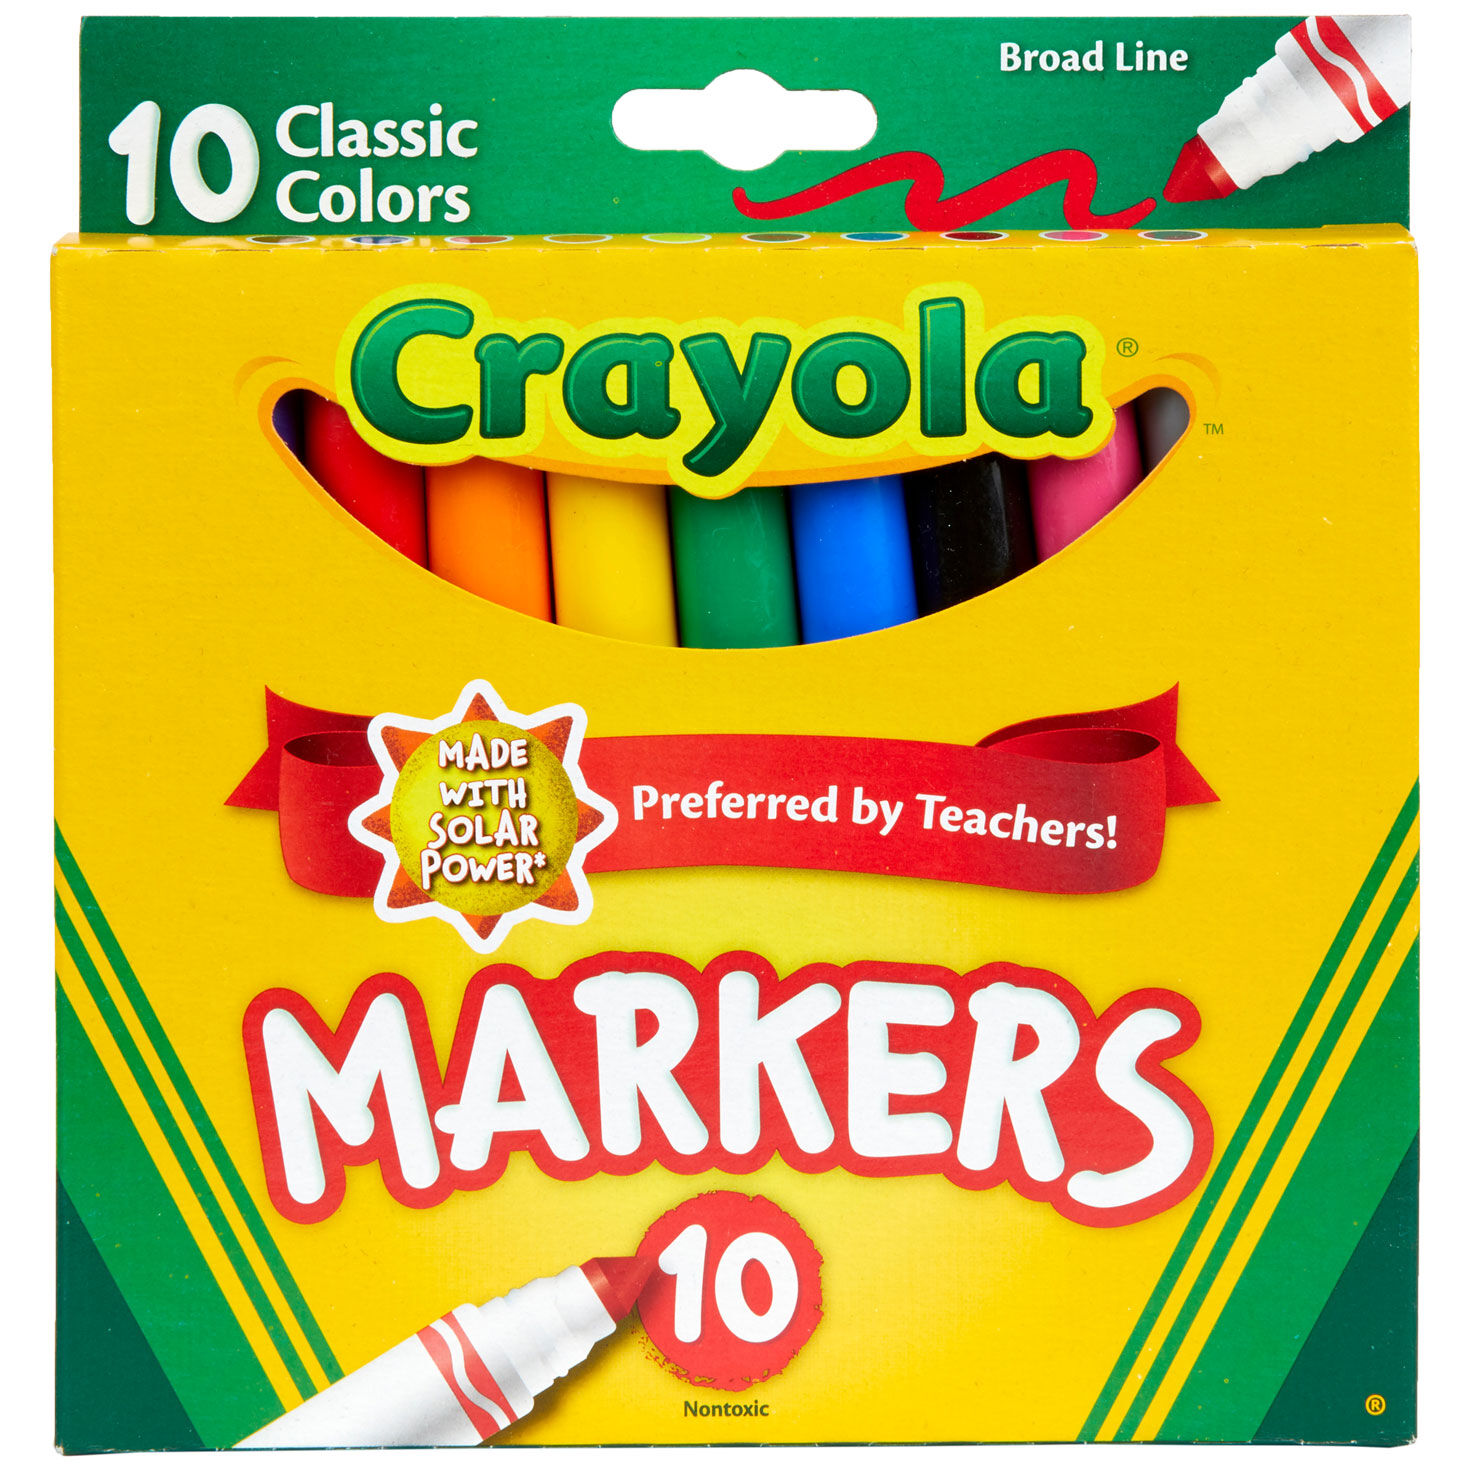 https://www.hallmark.com/dw/image/v2/AALB_PRD/on/demandware.static/-/Sites-hallmark-master/default/dw3ccce7bb/images/finished-goods/products/587722/Crayola-Classic-Colors-Broad-Line-Markers-10-count_587722_01.jpg?sfrm=jpg